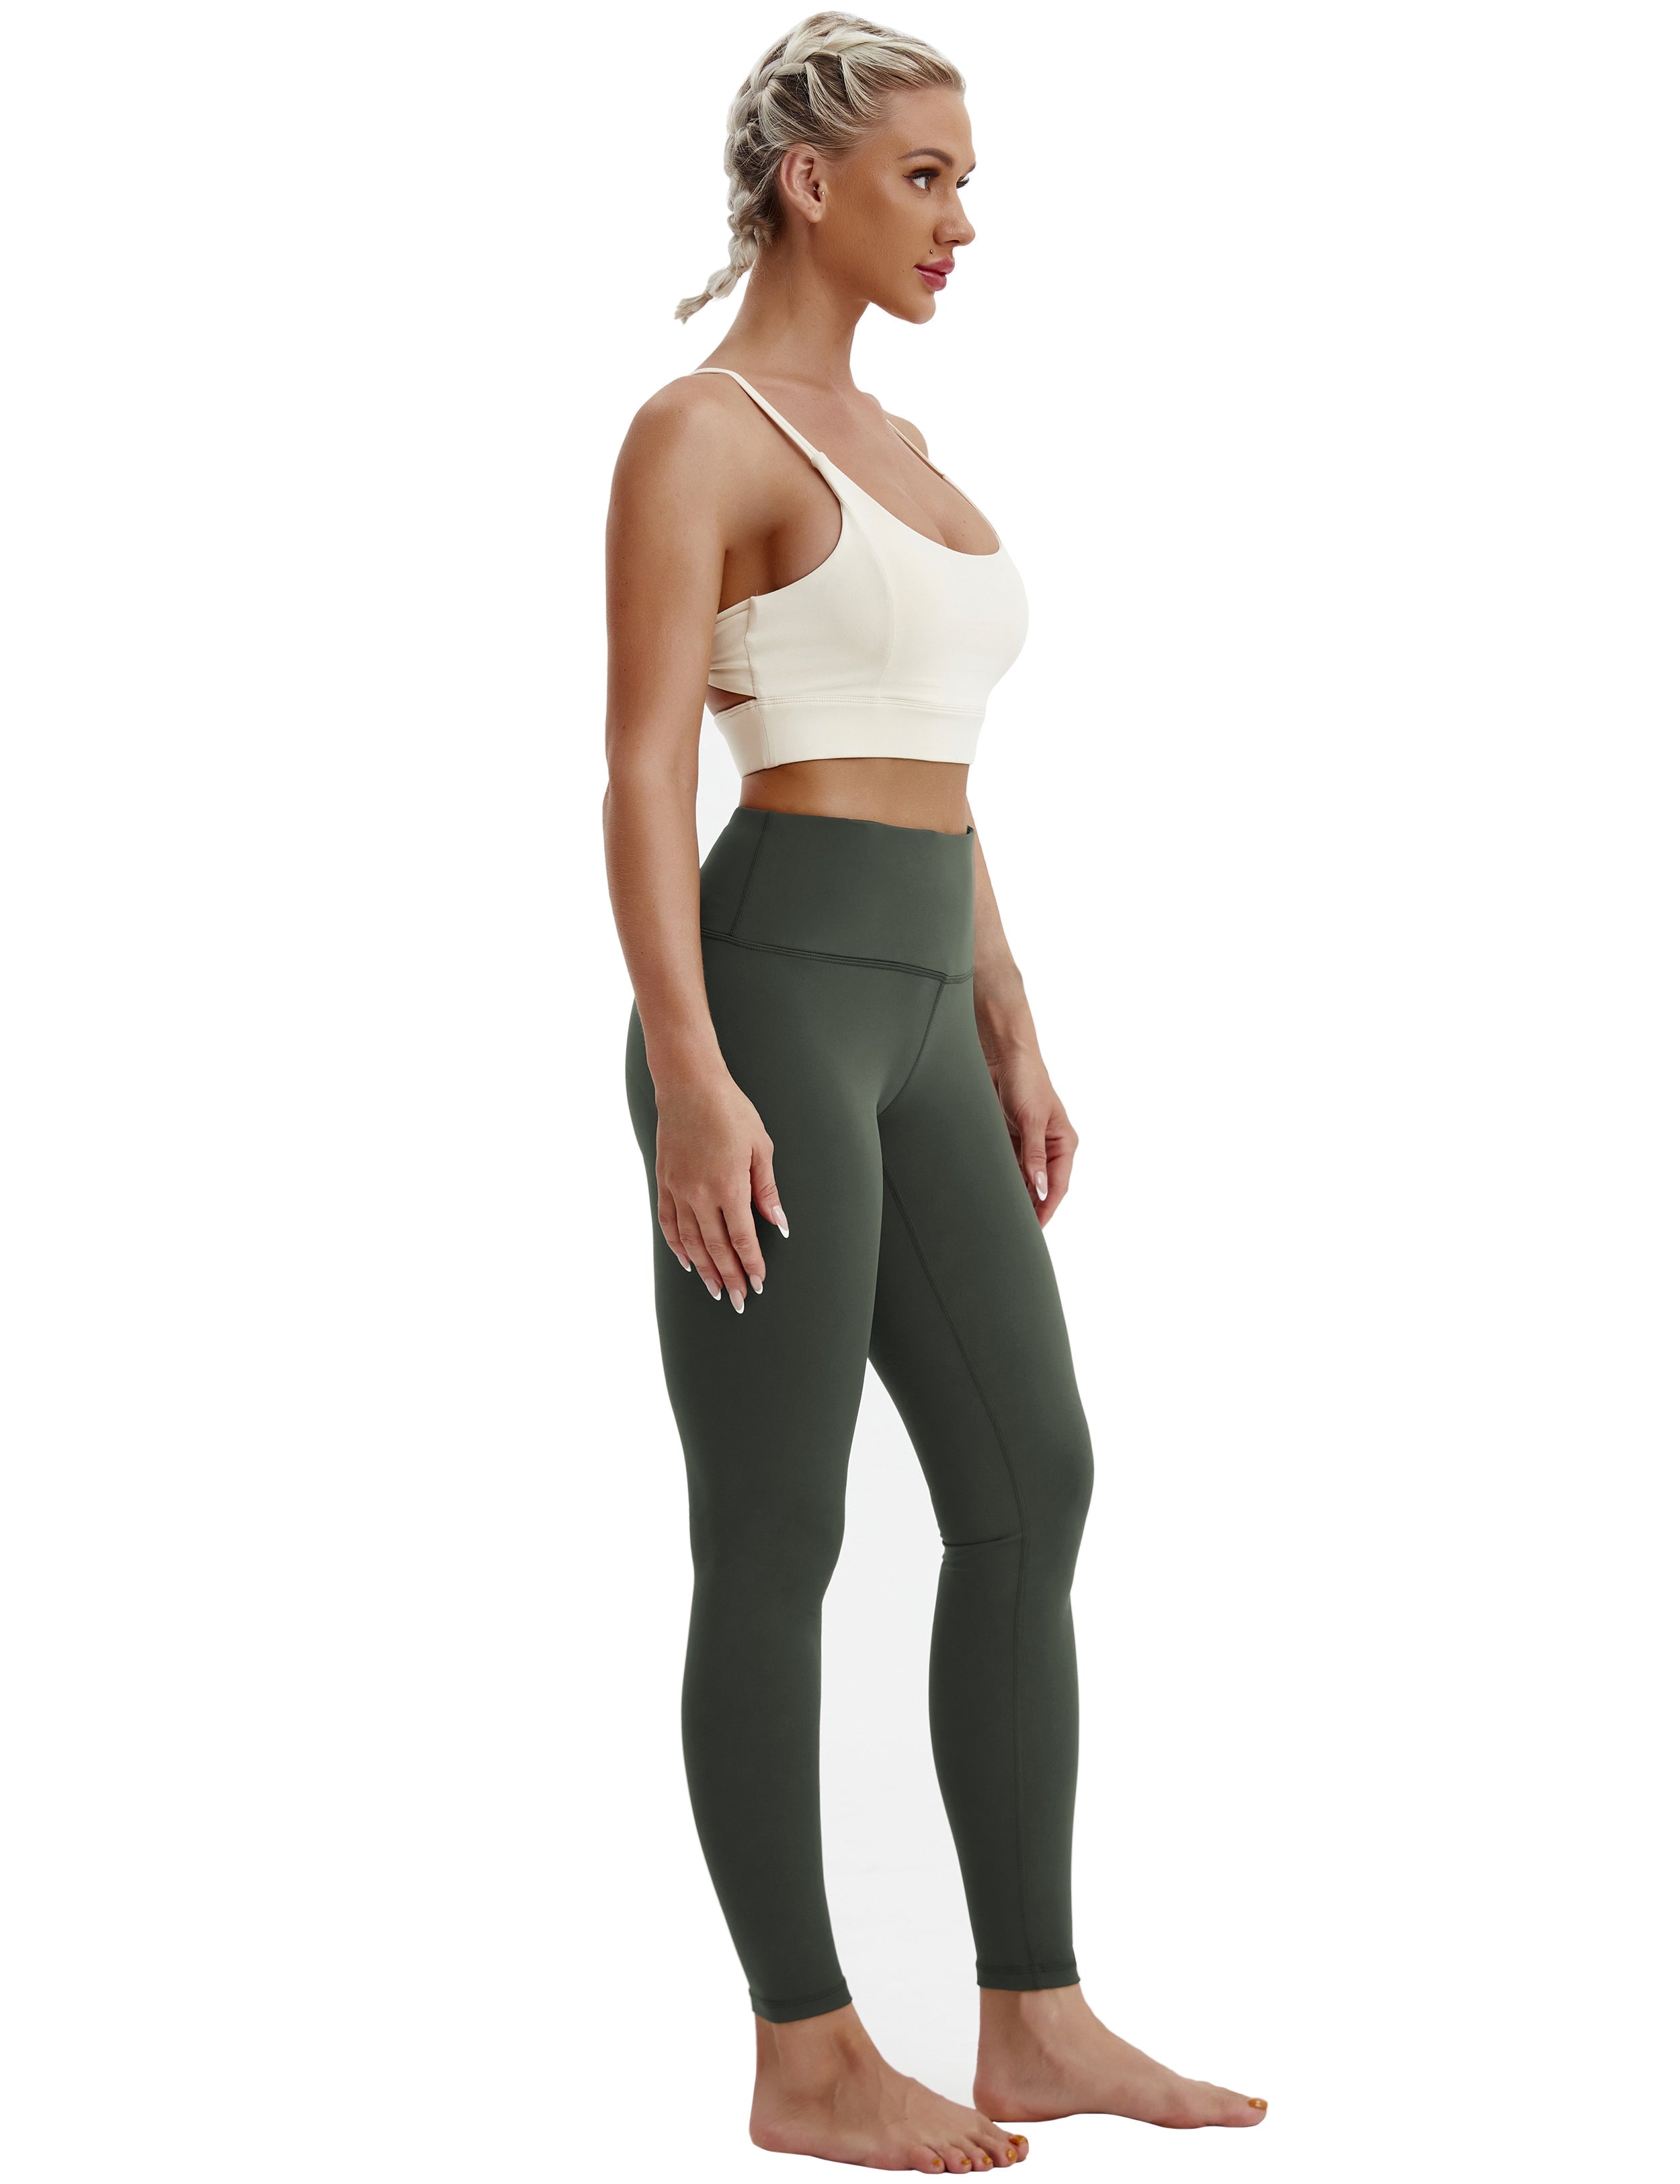 High Waist Pilates Pants olivegray 75%Nylon/25%Spandex Fabric doesn't attract lint easily 4-way stretch No see-through Moisture-wicking Tummy control Inner pocket Four lengths